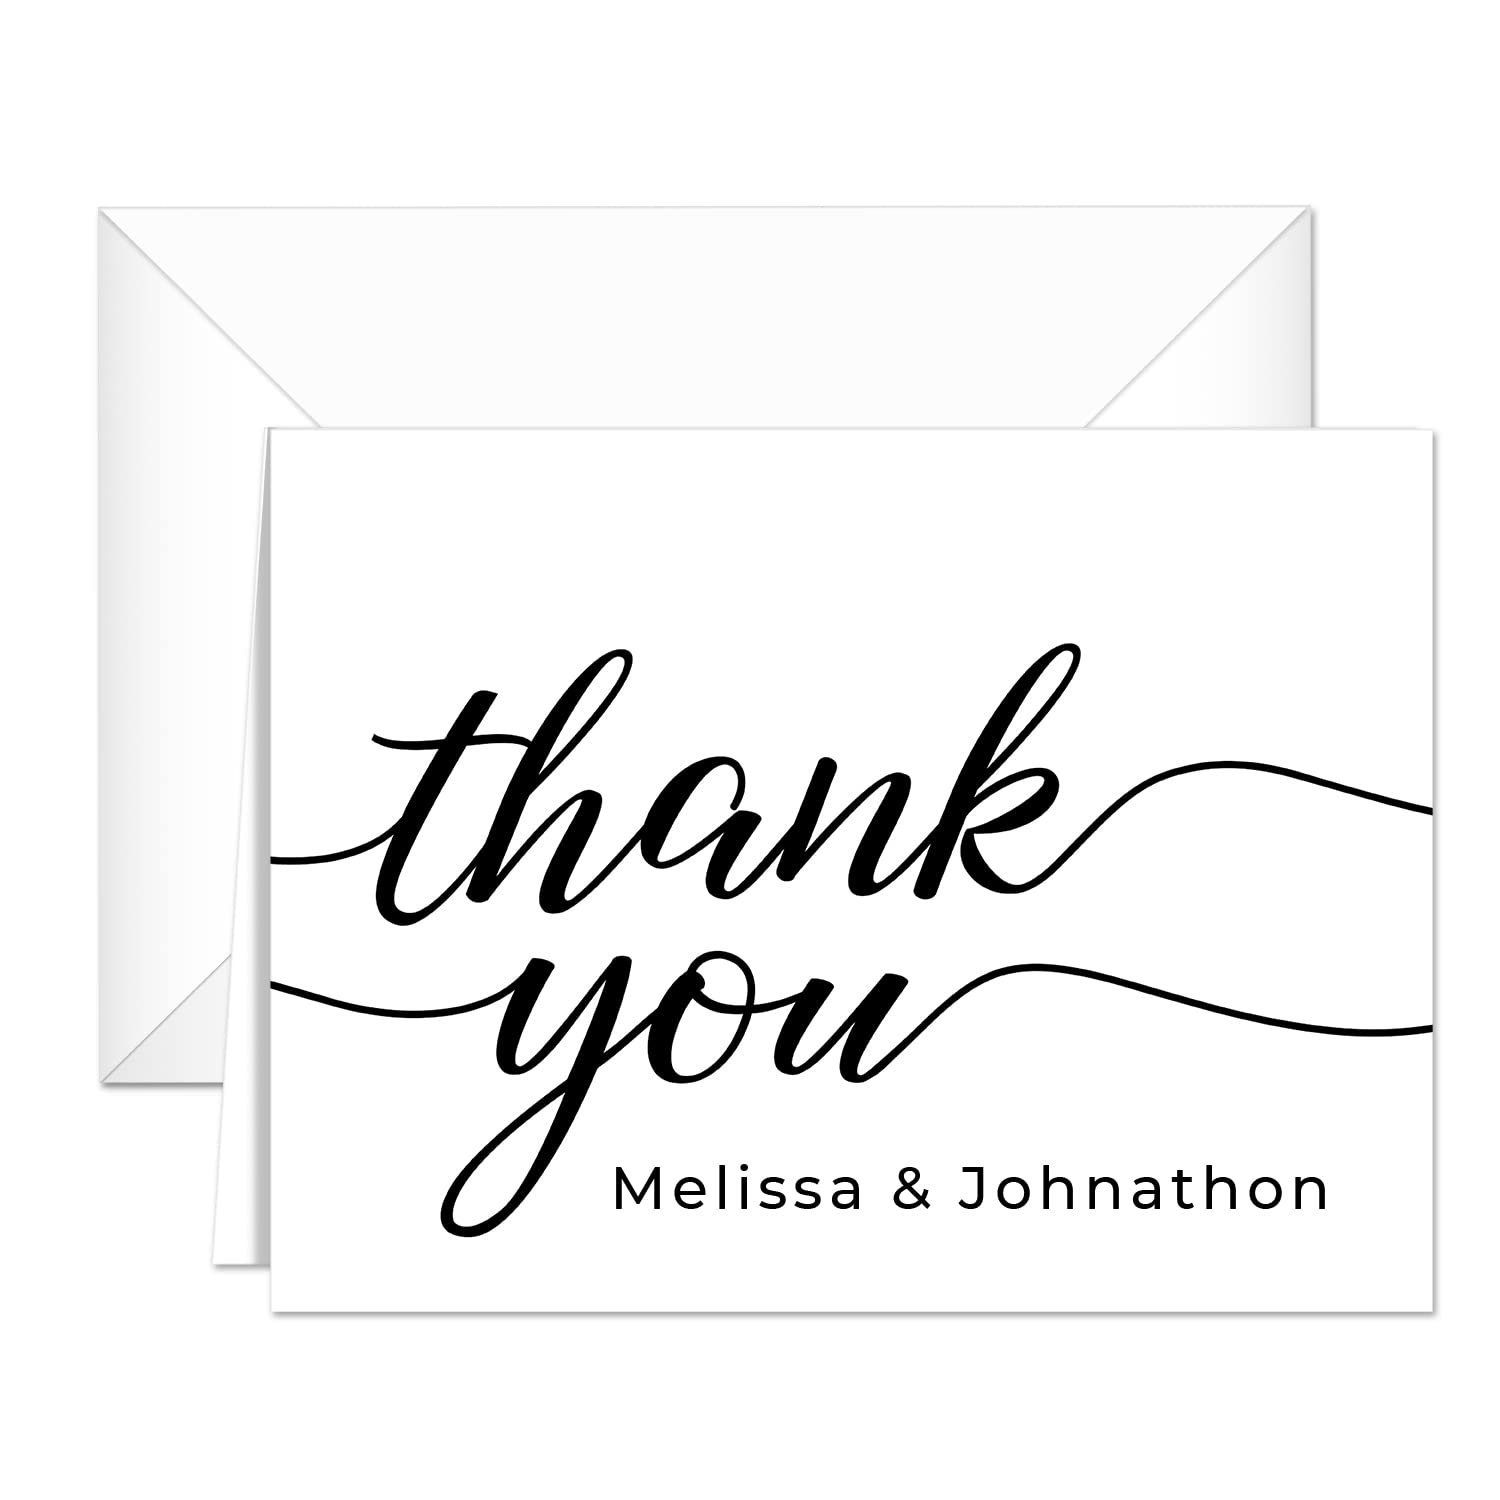 A personalized thank you note.